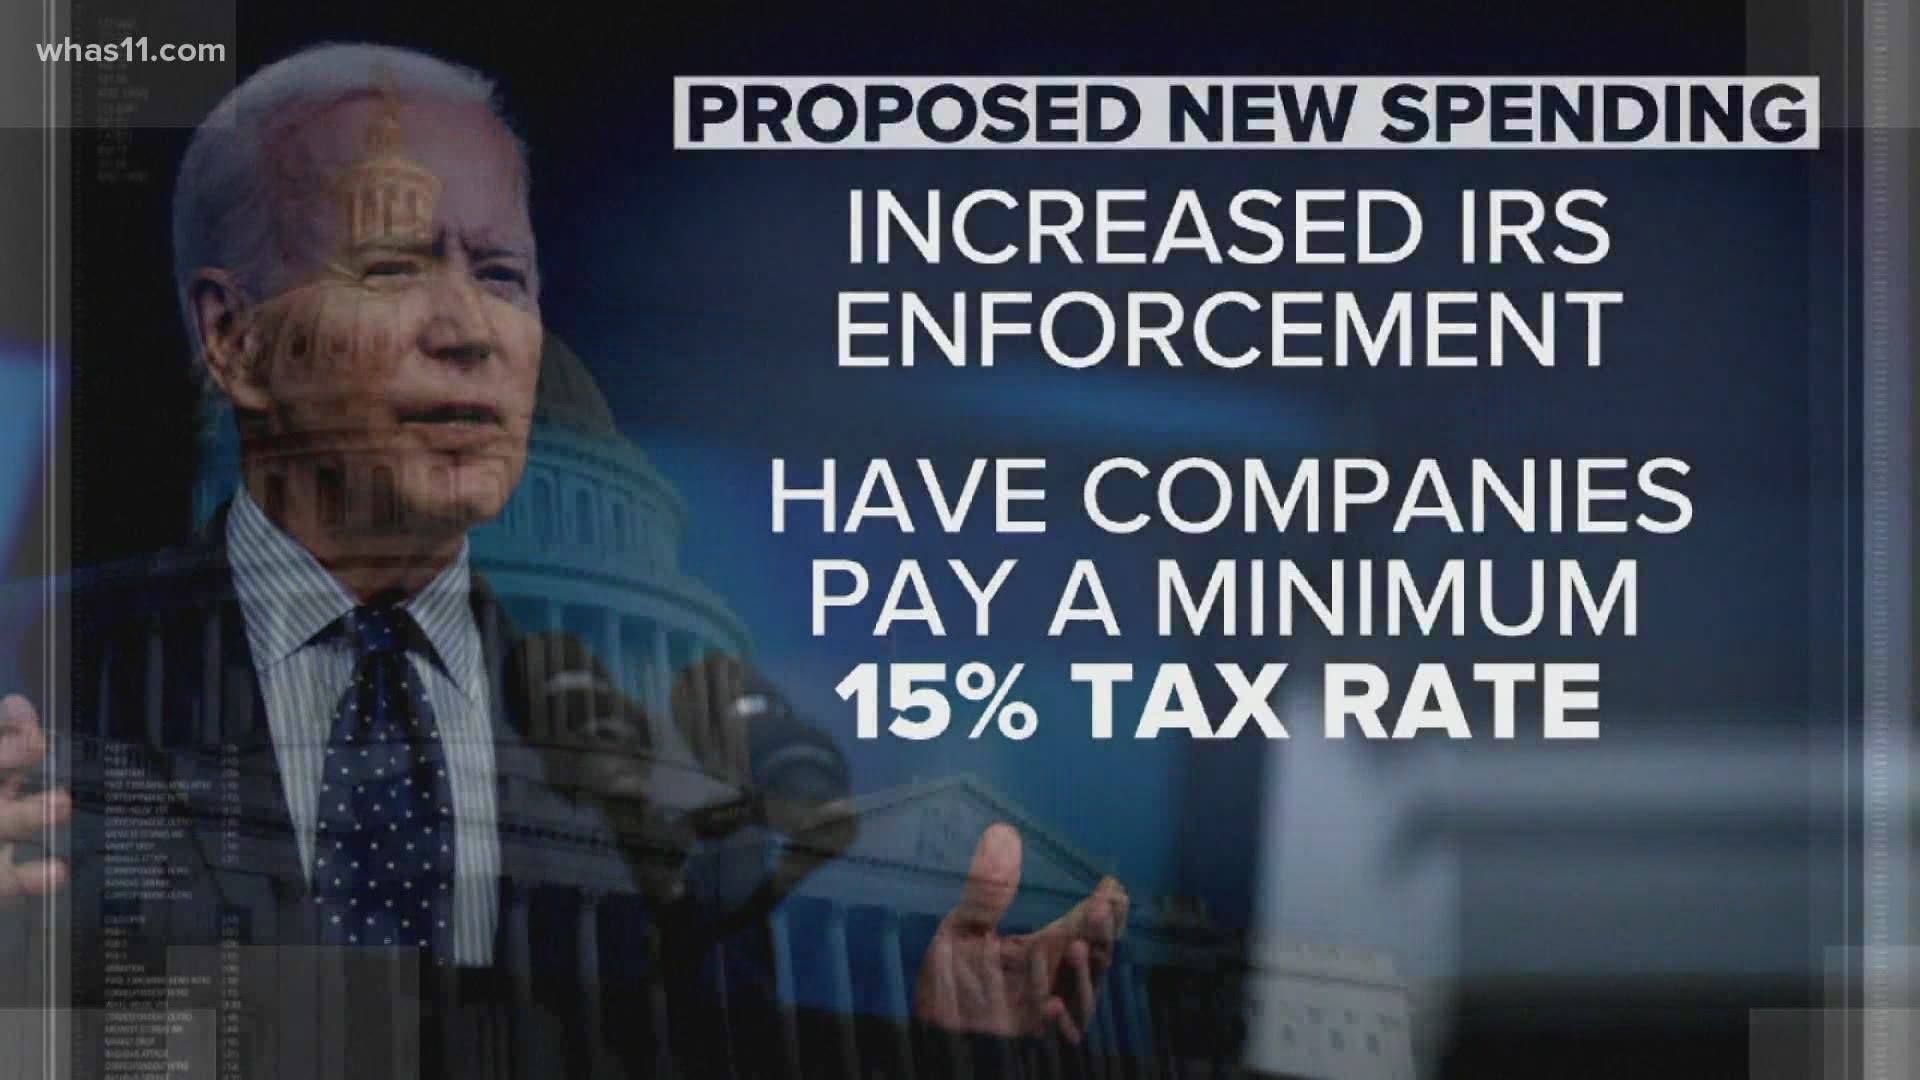 President Joe Biden proposed an infrastructure package worth $1 trillion in new spending that would be funded without raising the corporate tax rate.